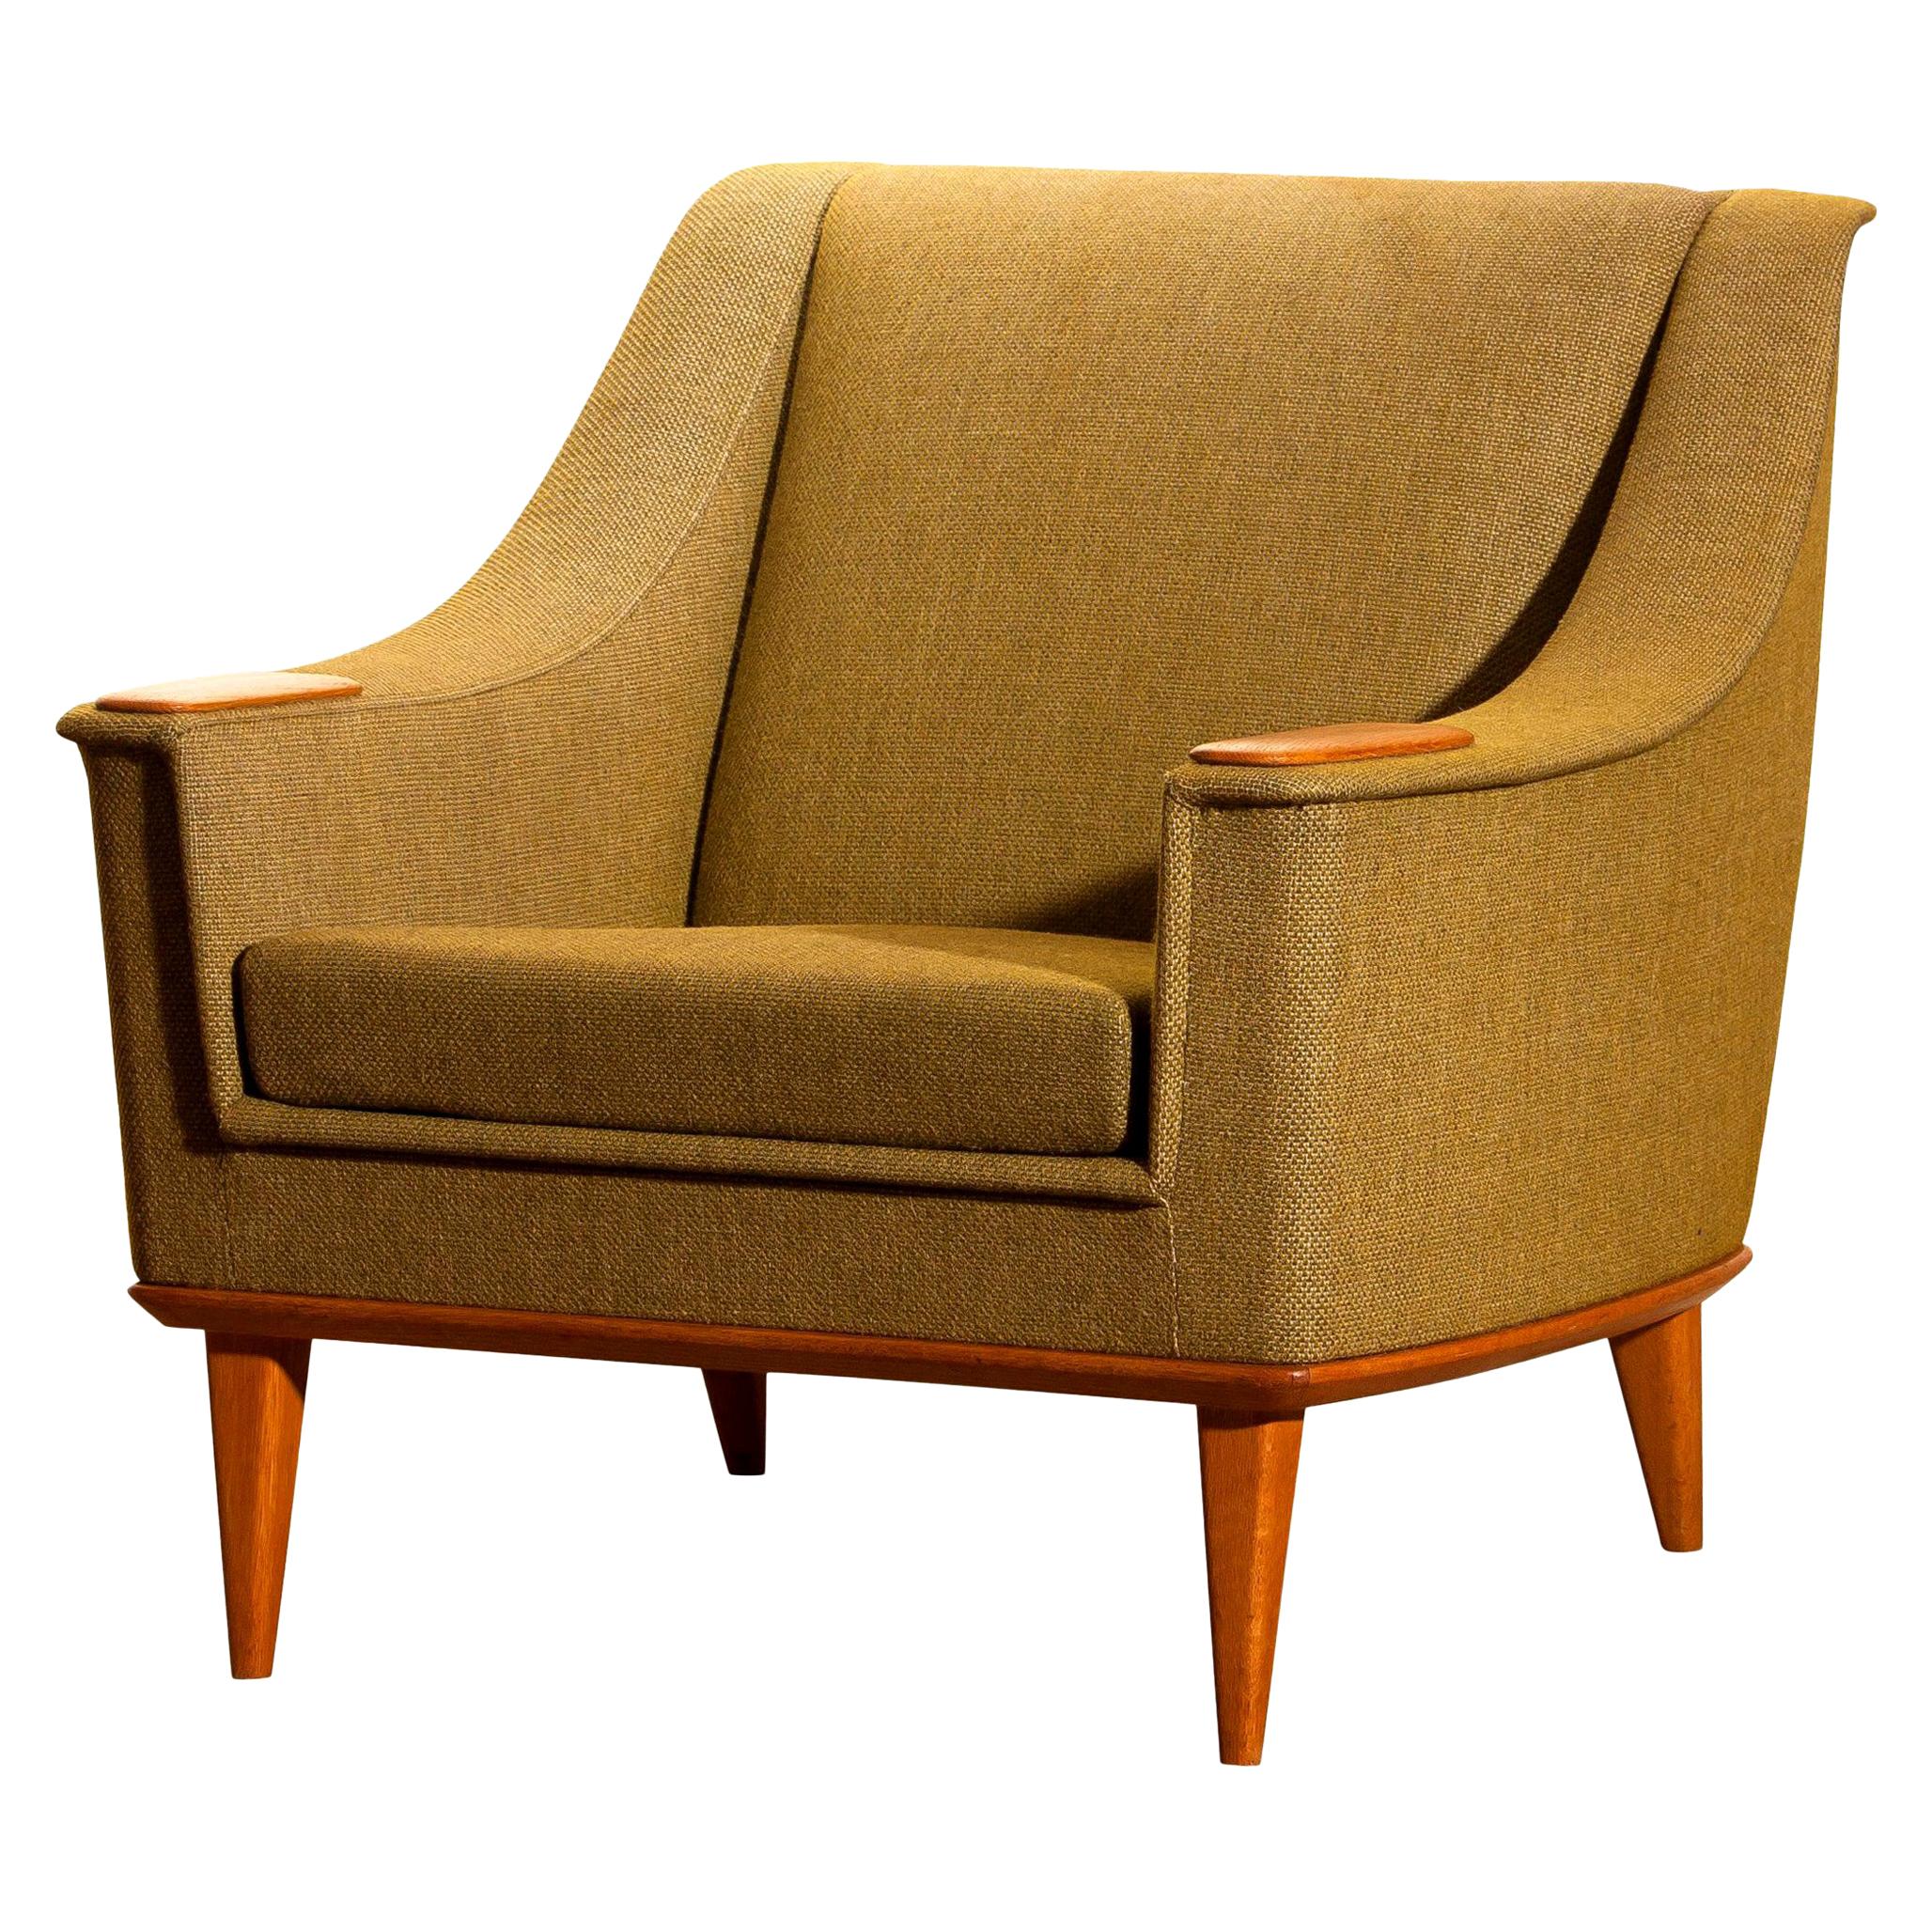 Beautiful and original midcentury lounge / easy chair with oak details by Folke Ohlsson for DUX, Sweden.
This chair sits extremely comfortable and is in good condition.

Period: 1960.
The dimensions are: Depth 77 cm, 30 inch, wide 77 cm, 30